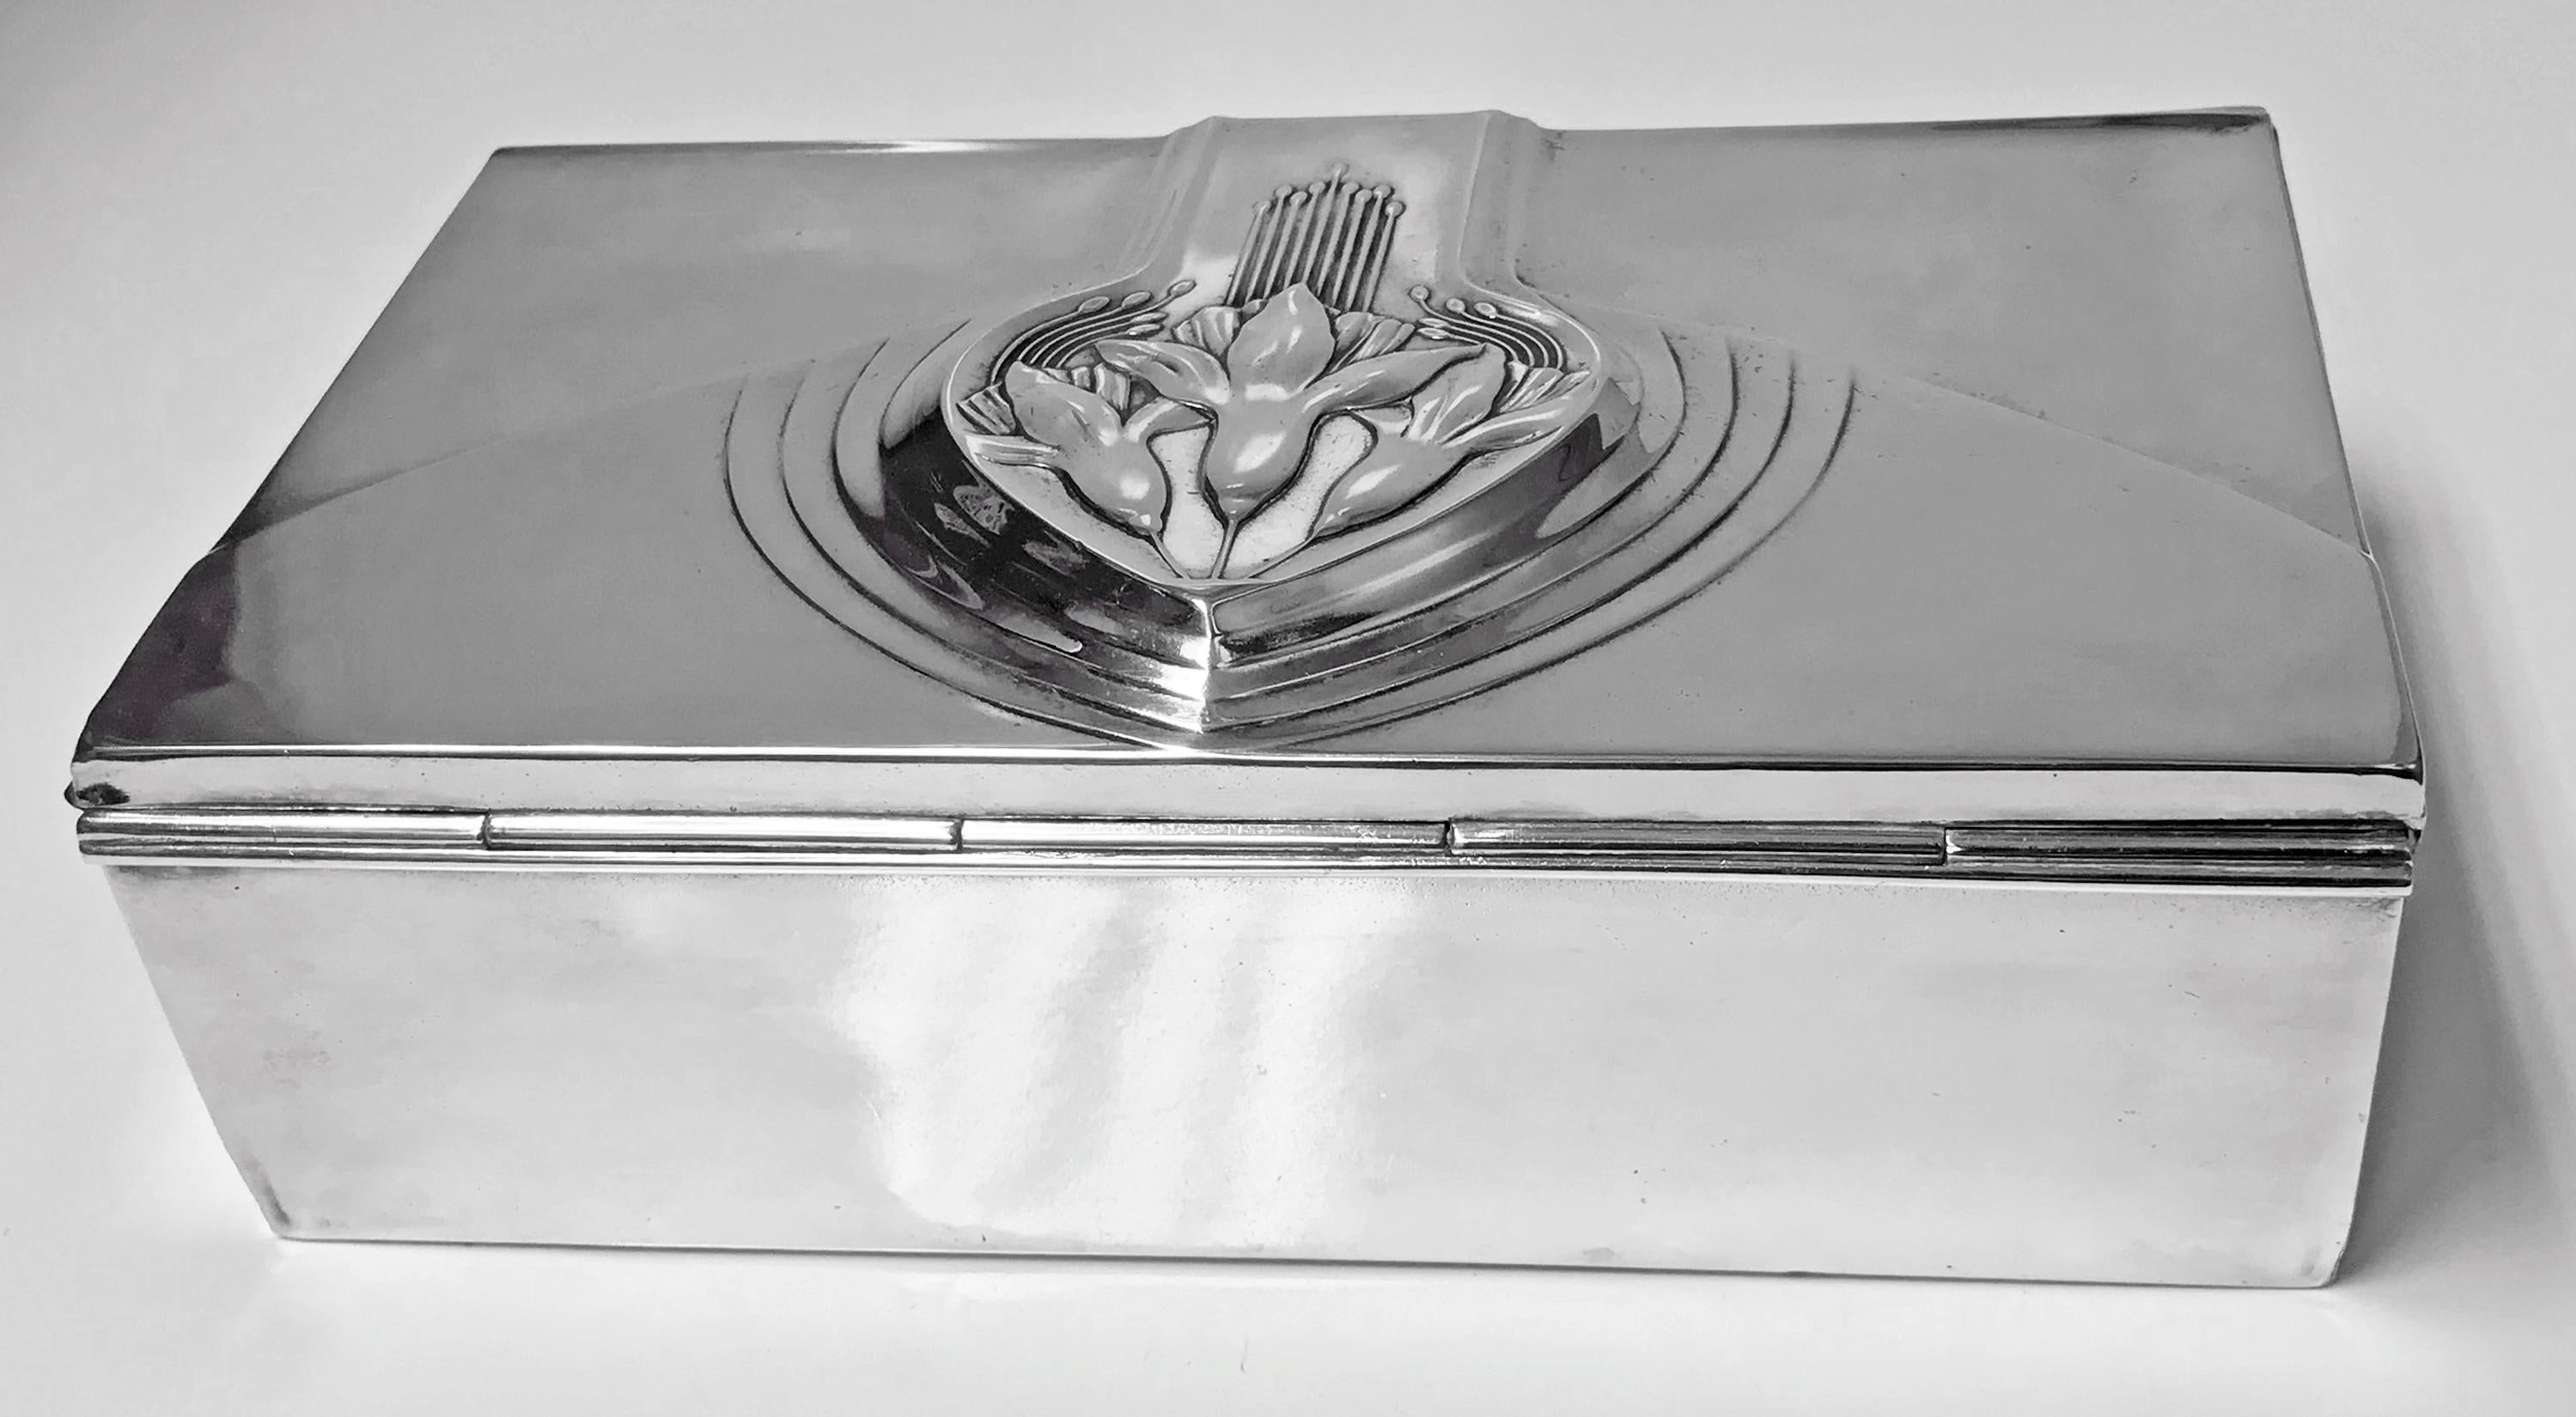 Jugendstil Nouveau secessionist silver plate jewelry box, WMF, Germany, circa 1906. The large rectangular box with stylized raised foliate hinged cover, plain sides. Satin silk lined interior. WMF marks on underside. Measures: 8.75 x 5.50 x 2.50